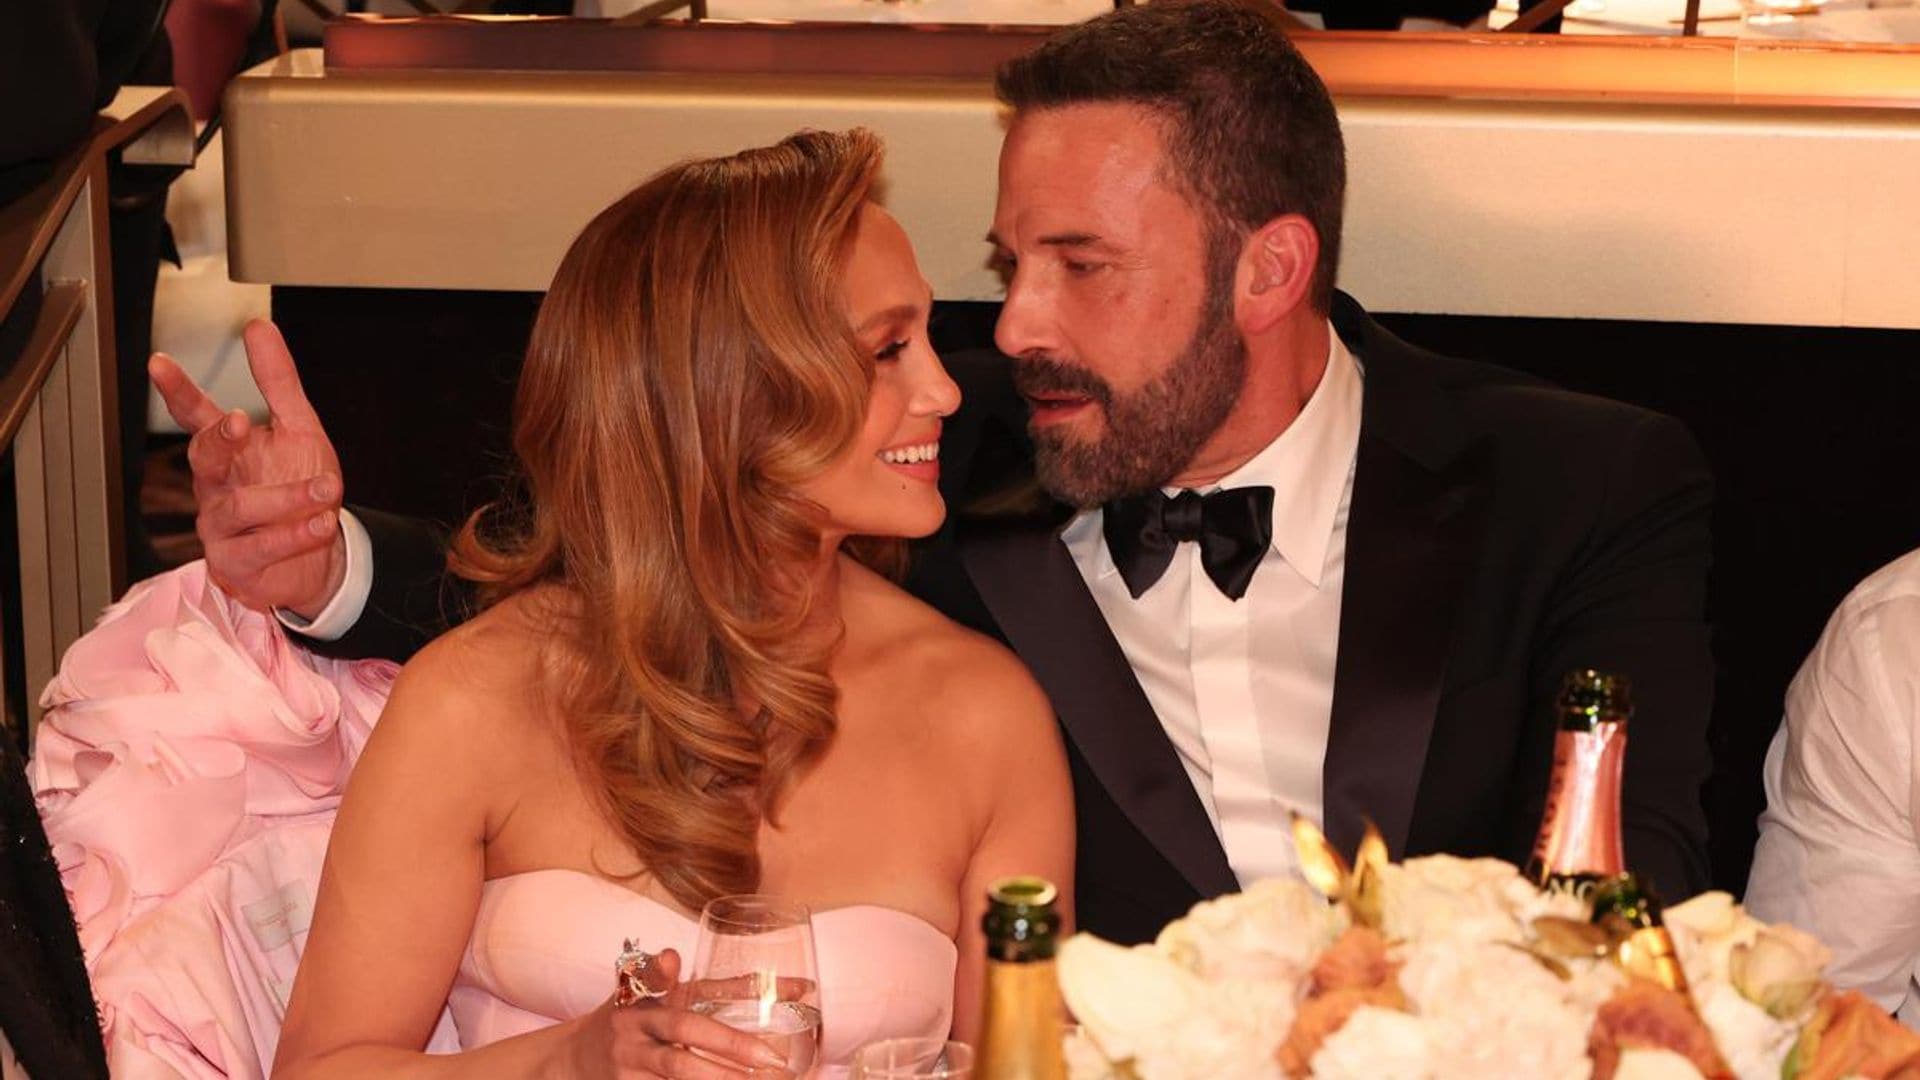 Jennifer Lopez defends Ben Affleck after viral moment: ‘You don’t need to worry about Ben’